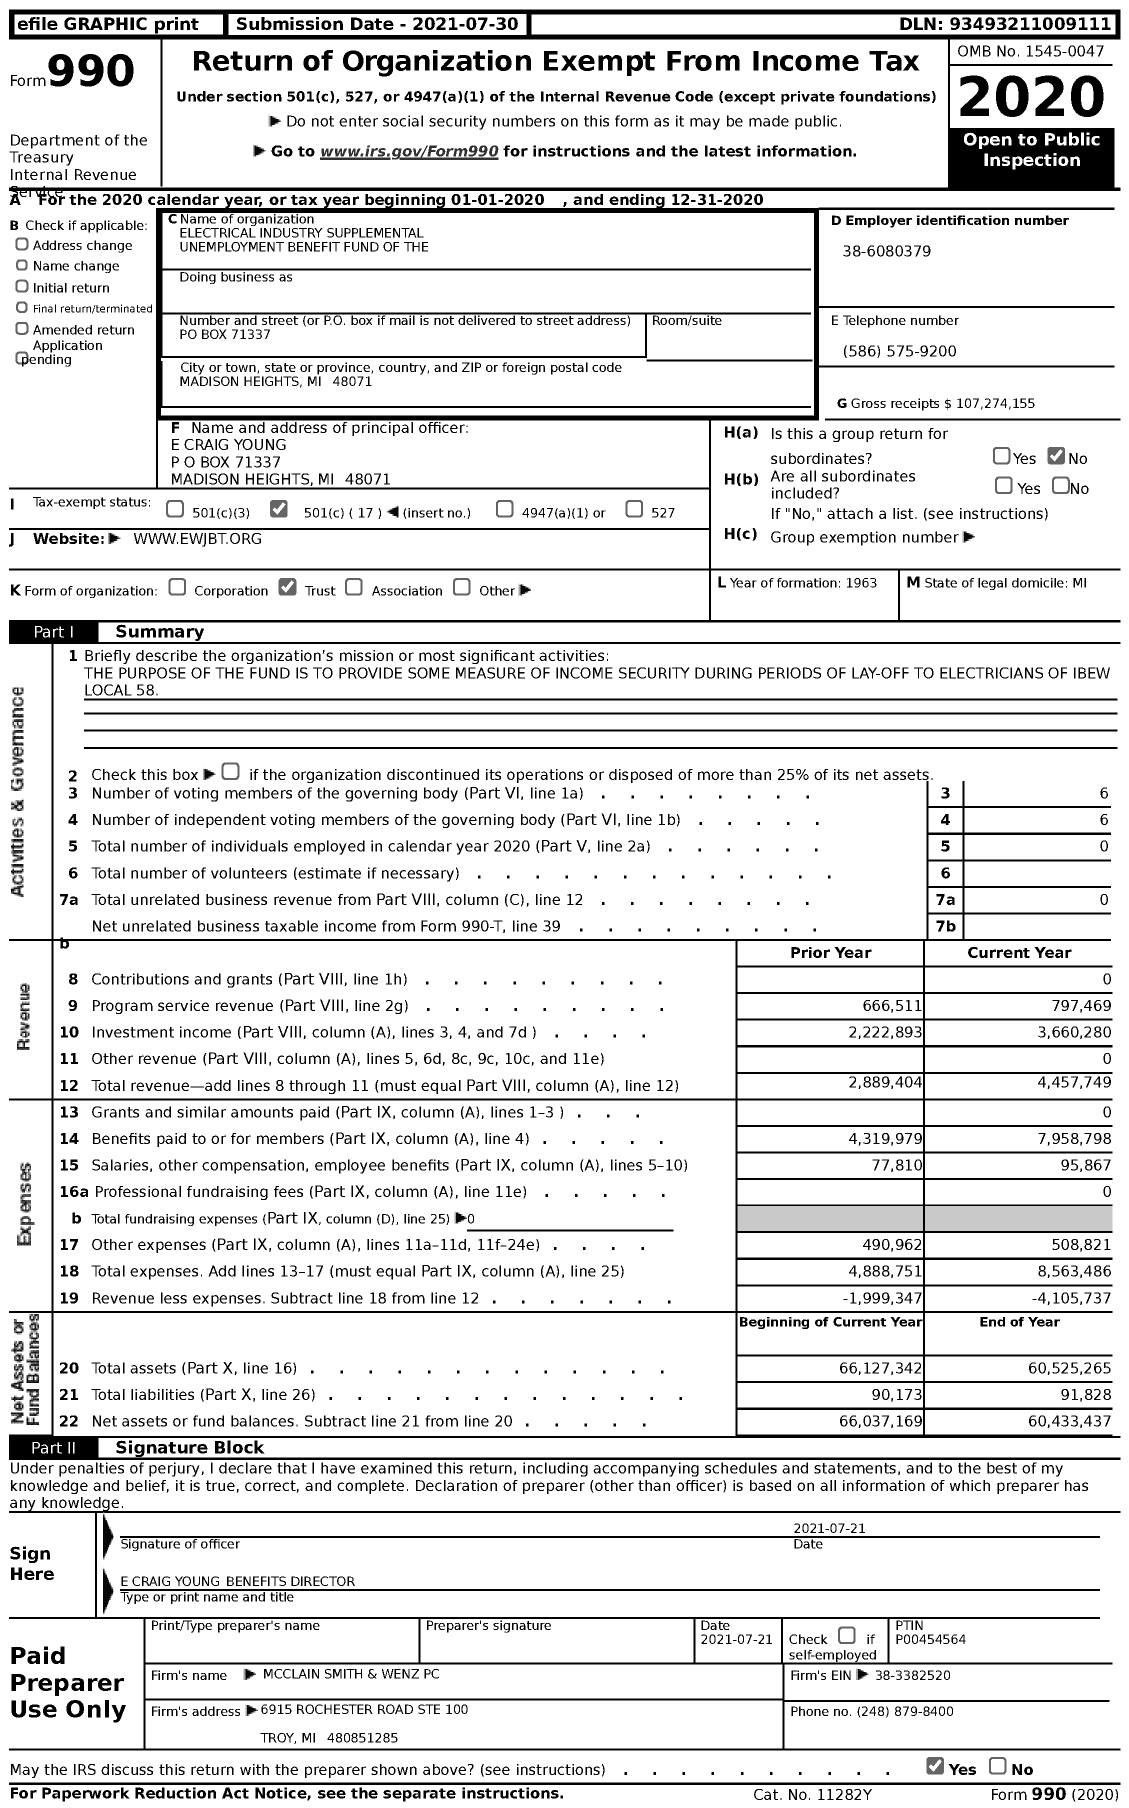 Image of first page of 2020 Form 990 for Electrical Industry Supplemental Unemployment Benefit Fund